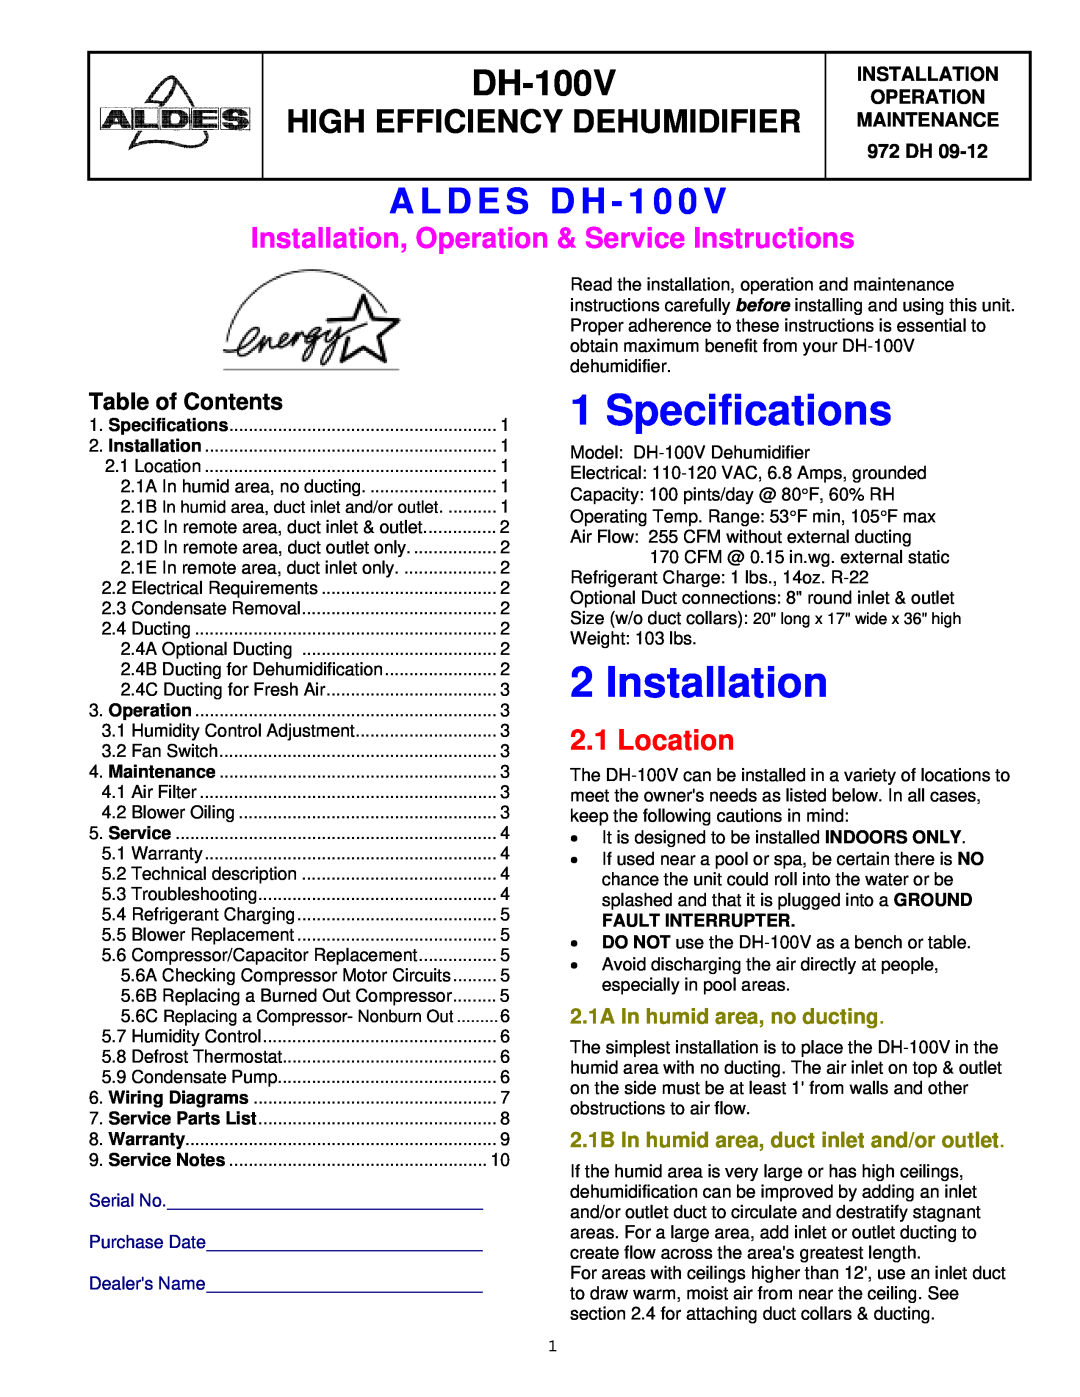 American Aldes DH-100V specifications Specifications, Installation, Location, 2.1A In humid area, no ducting, Serial No 